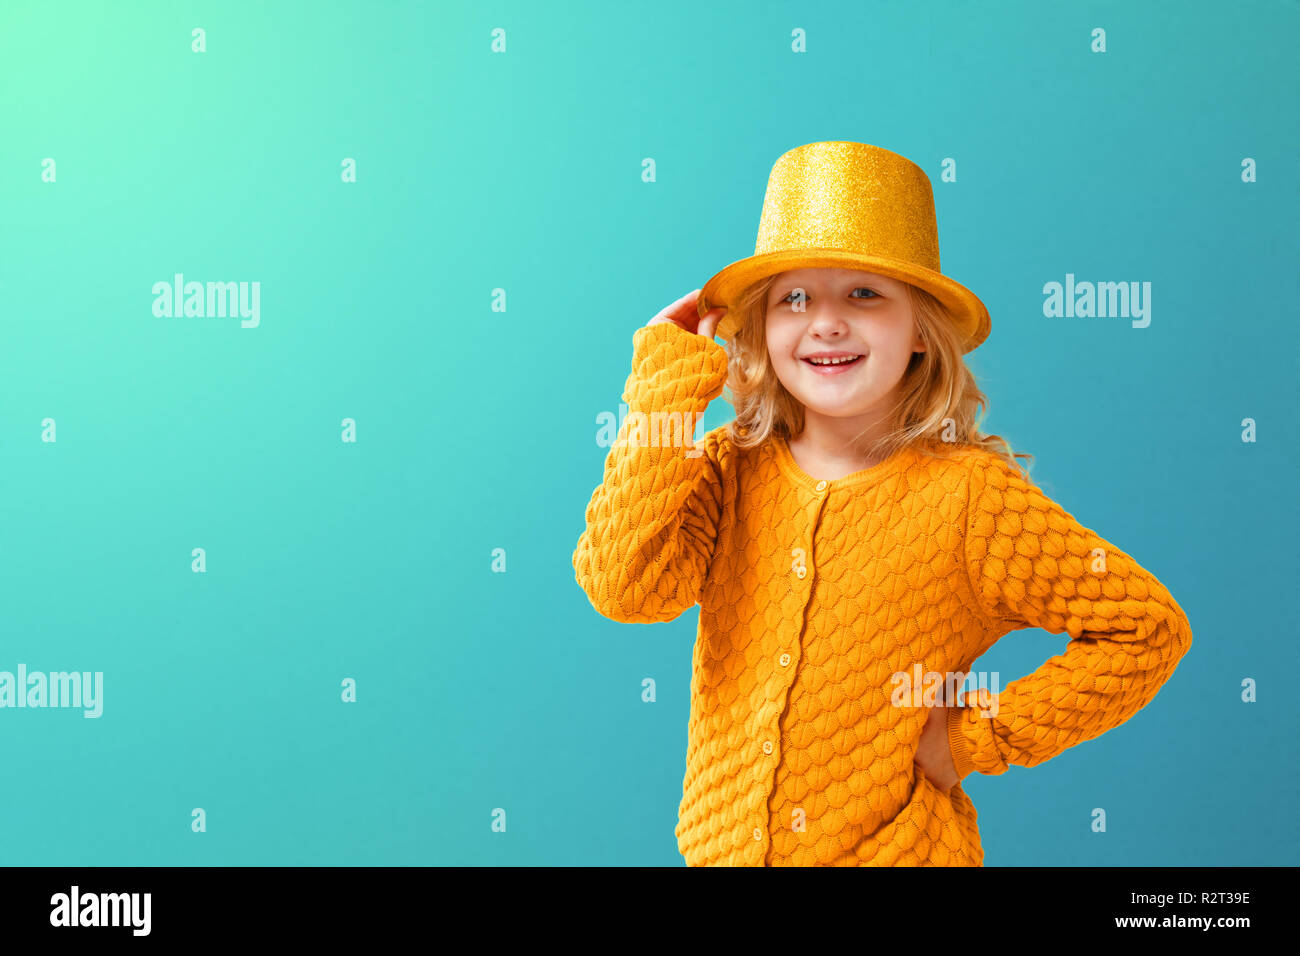 Portrait of a little girl in a knitted mustard jacket and a shiny yellow cylinder hat of a magician on a turquoise background. Holiday concept. Stock Photo